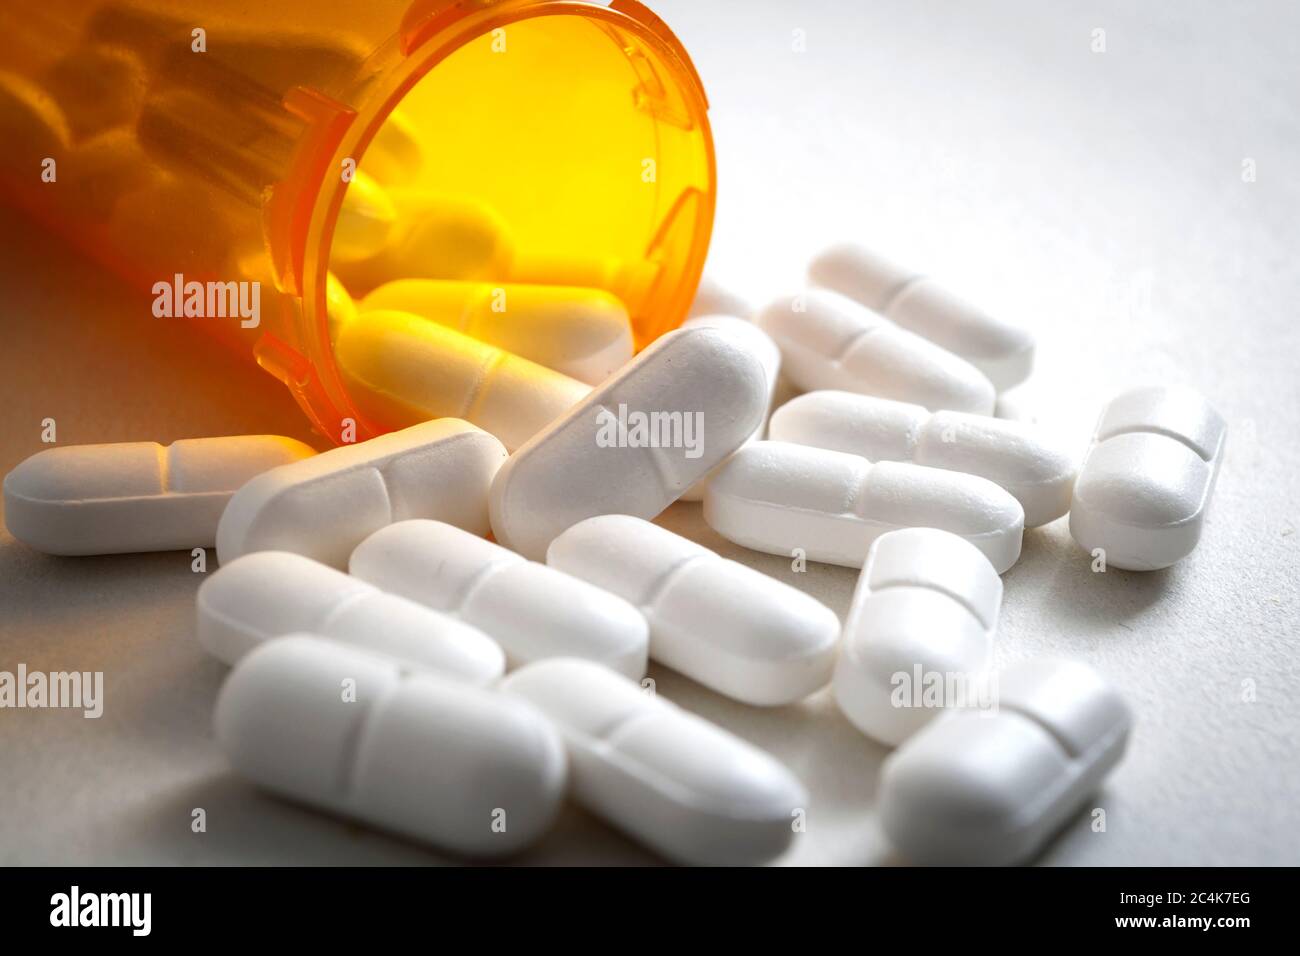 Opioid epidemic, painkillers and drug abuse concept with close up on a bottle of prescription drugs and hydrocodone pills falling out of it on white Stock Photo